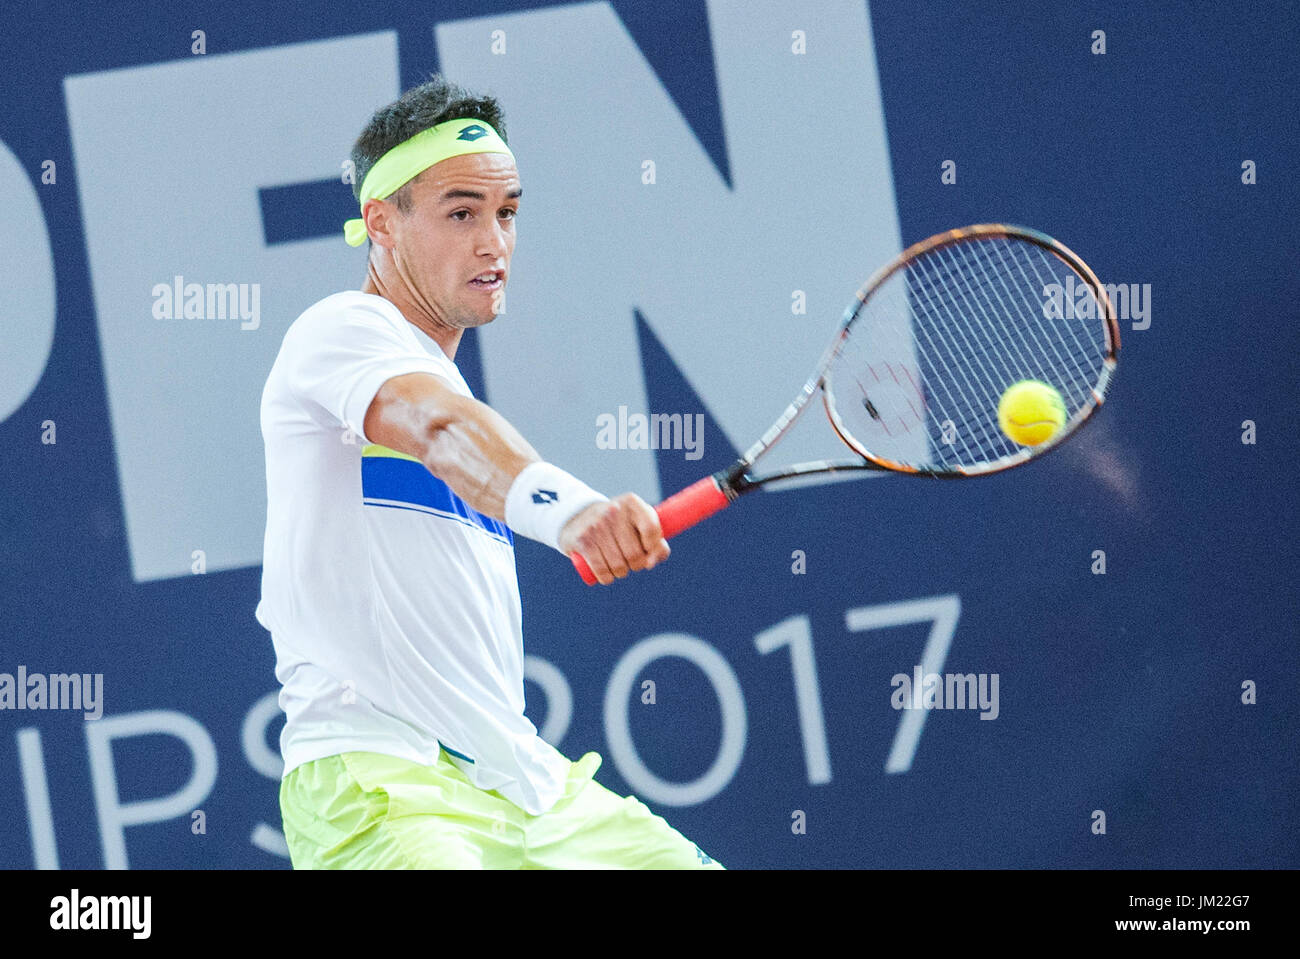 Hamburg, Germany. 25th July, 2017. Nicolas Kicker of Argentina playing  against Tommy Haas of Germany in the first round of the men's singles at  the Tennis ATP-Tour German Open in Hamburg, Germany,